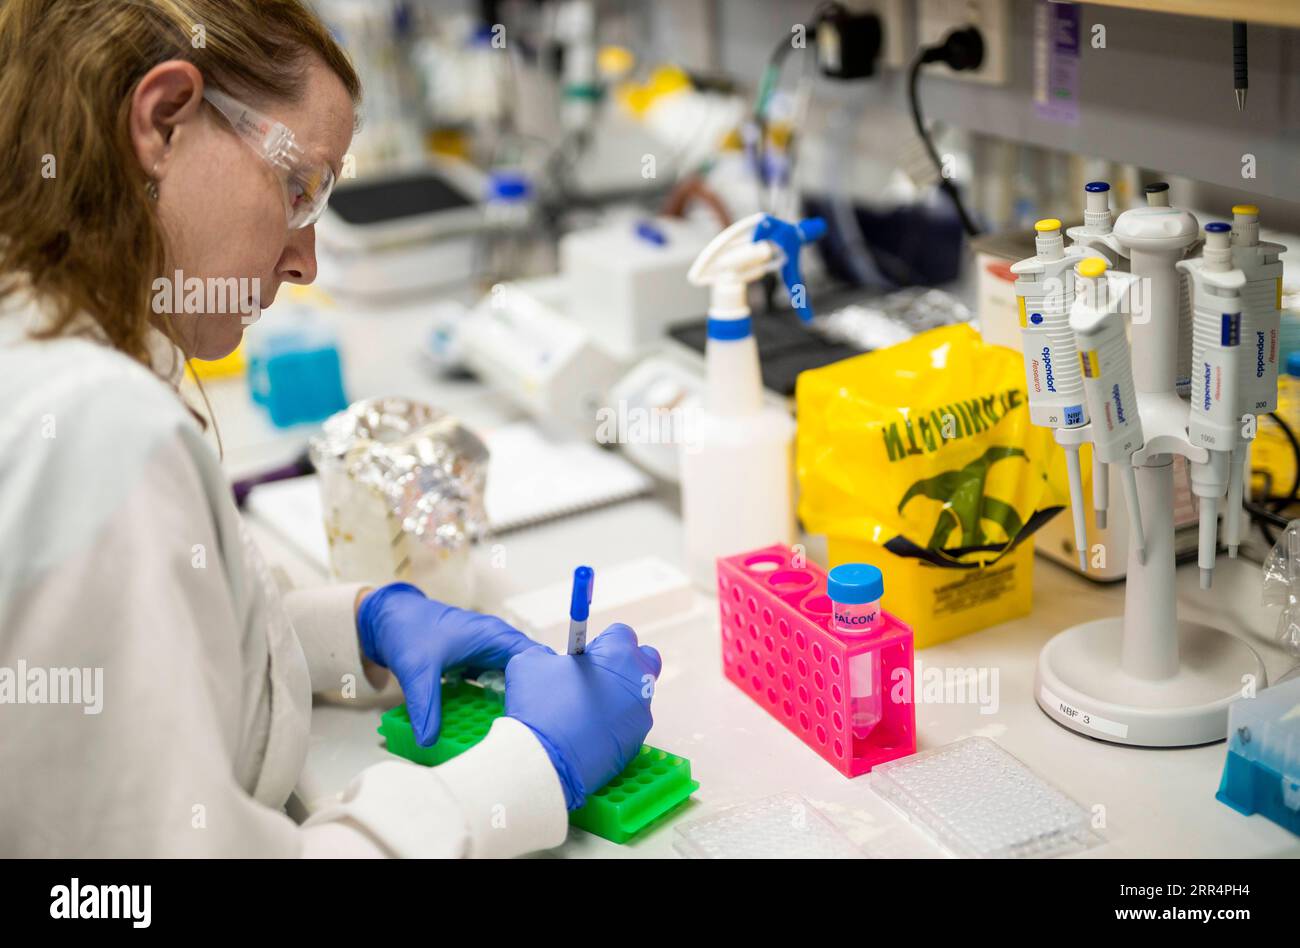 201211 -- SYDNEY, Dec. 11, 2020 -- File photo taken on April 1, 2020 shows a researcher working at a lab of the UQ in Brisbane, Australia. An Australian COVID-19 vaccine under development by the UQ and local biotech firm CSL will not progress to Phase 2/3 trials after returning false positive HIV test results. /Handout via Xinhua AUSTRALIA--VACCINE UniversityxofxQueensland PUBLICATIONxNOTxINxCHN Stock Photo